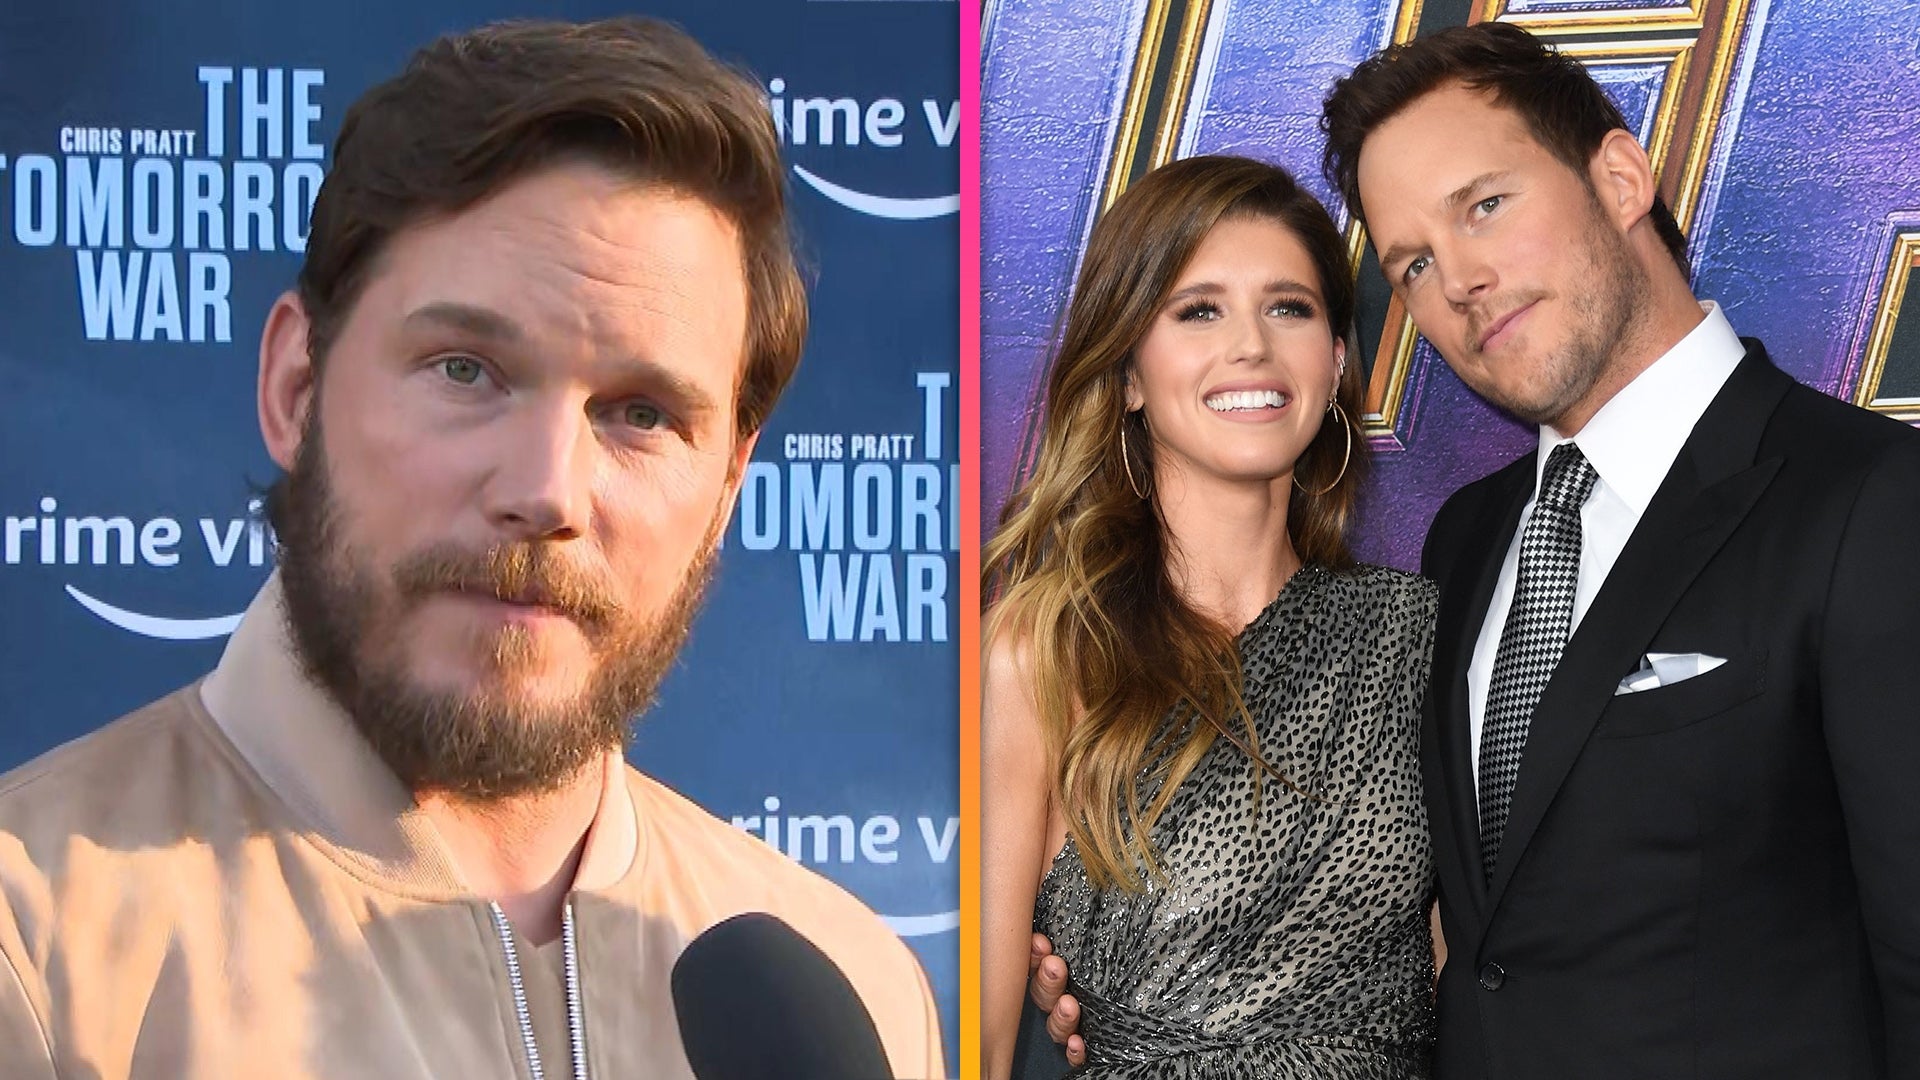 Chris Pratt urges couples to 'rush' to start a family: 'Don't wait